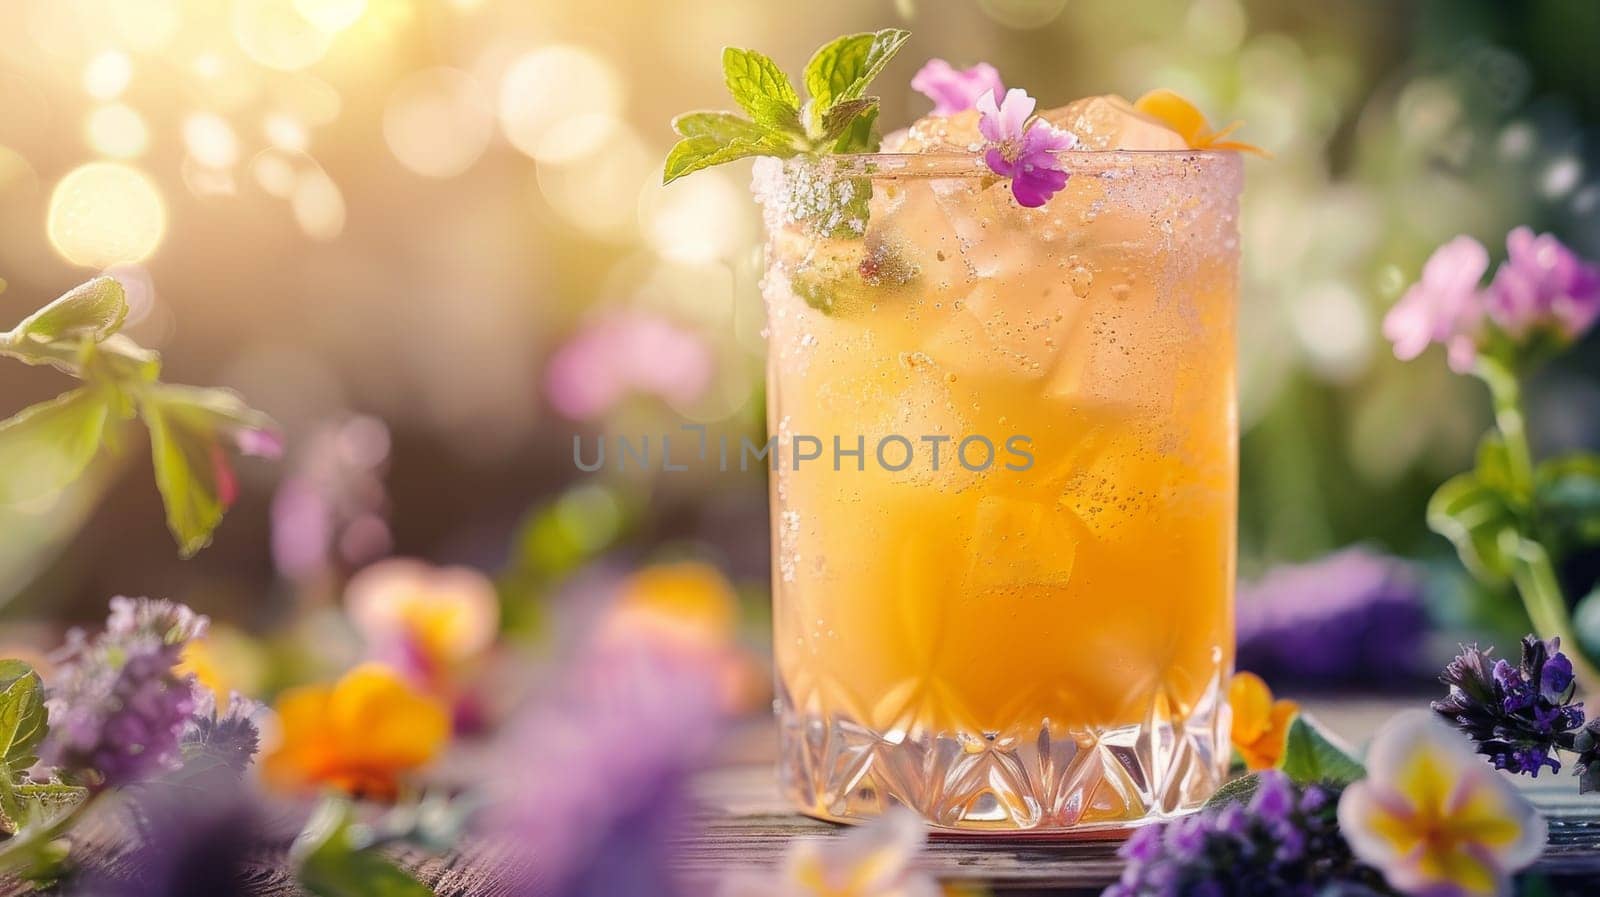 A glass of a drink with a flower garnish on top. The drink is yellow and has a mint garnish